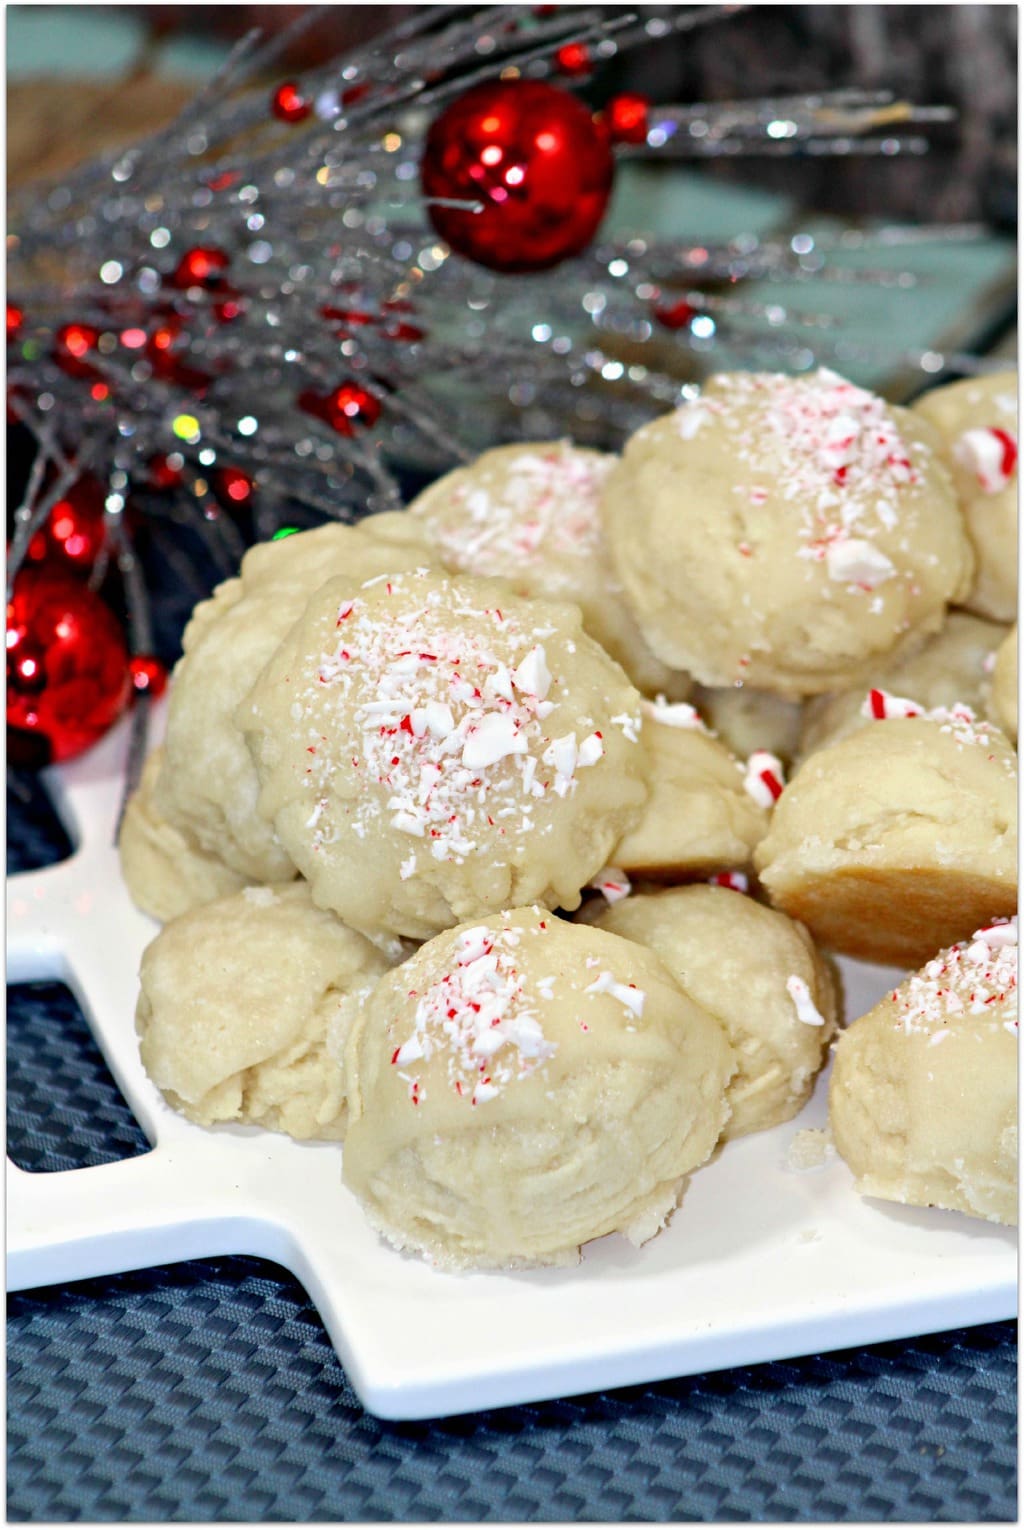 This Kentucky Butter Cookie recipe is easy and such a great grown-up treat for your Christmas party! I love having desserts on hand for guests, and this is one everyone will love! Have friends each bring an appetizer and you can serve dessert, for a ready-made holiday party! Who says you need to slave in the kitchen making food?